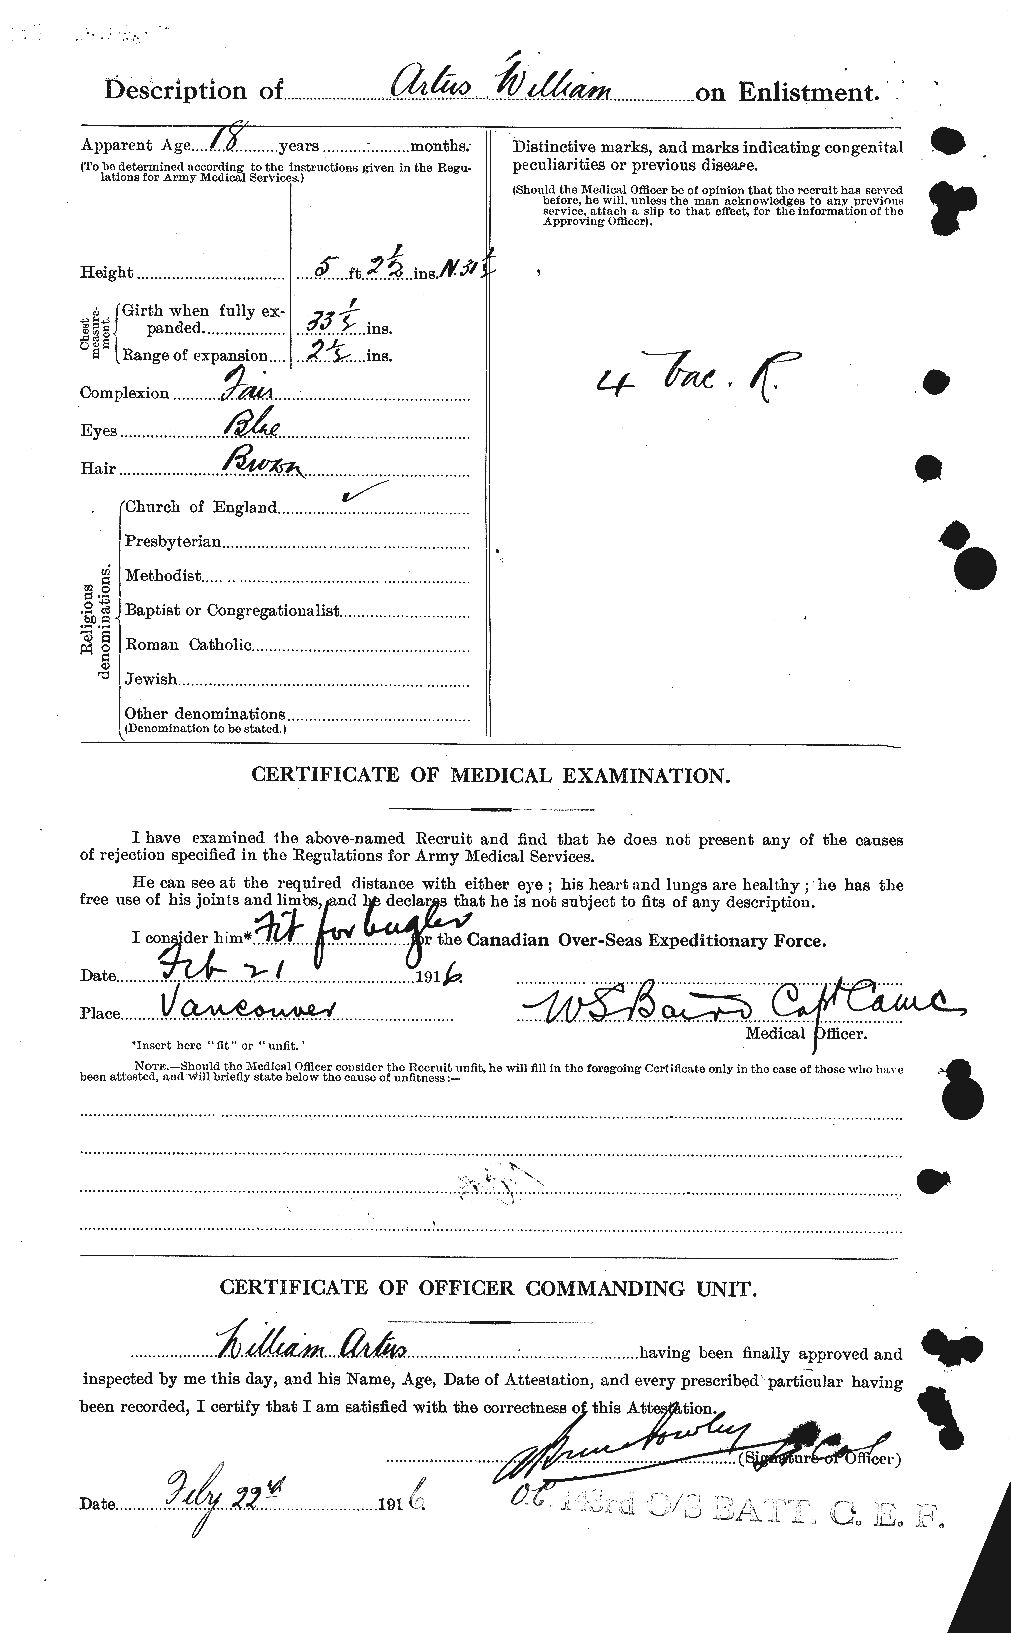 Personnel Records of the First World War - CEF 214717b